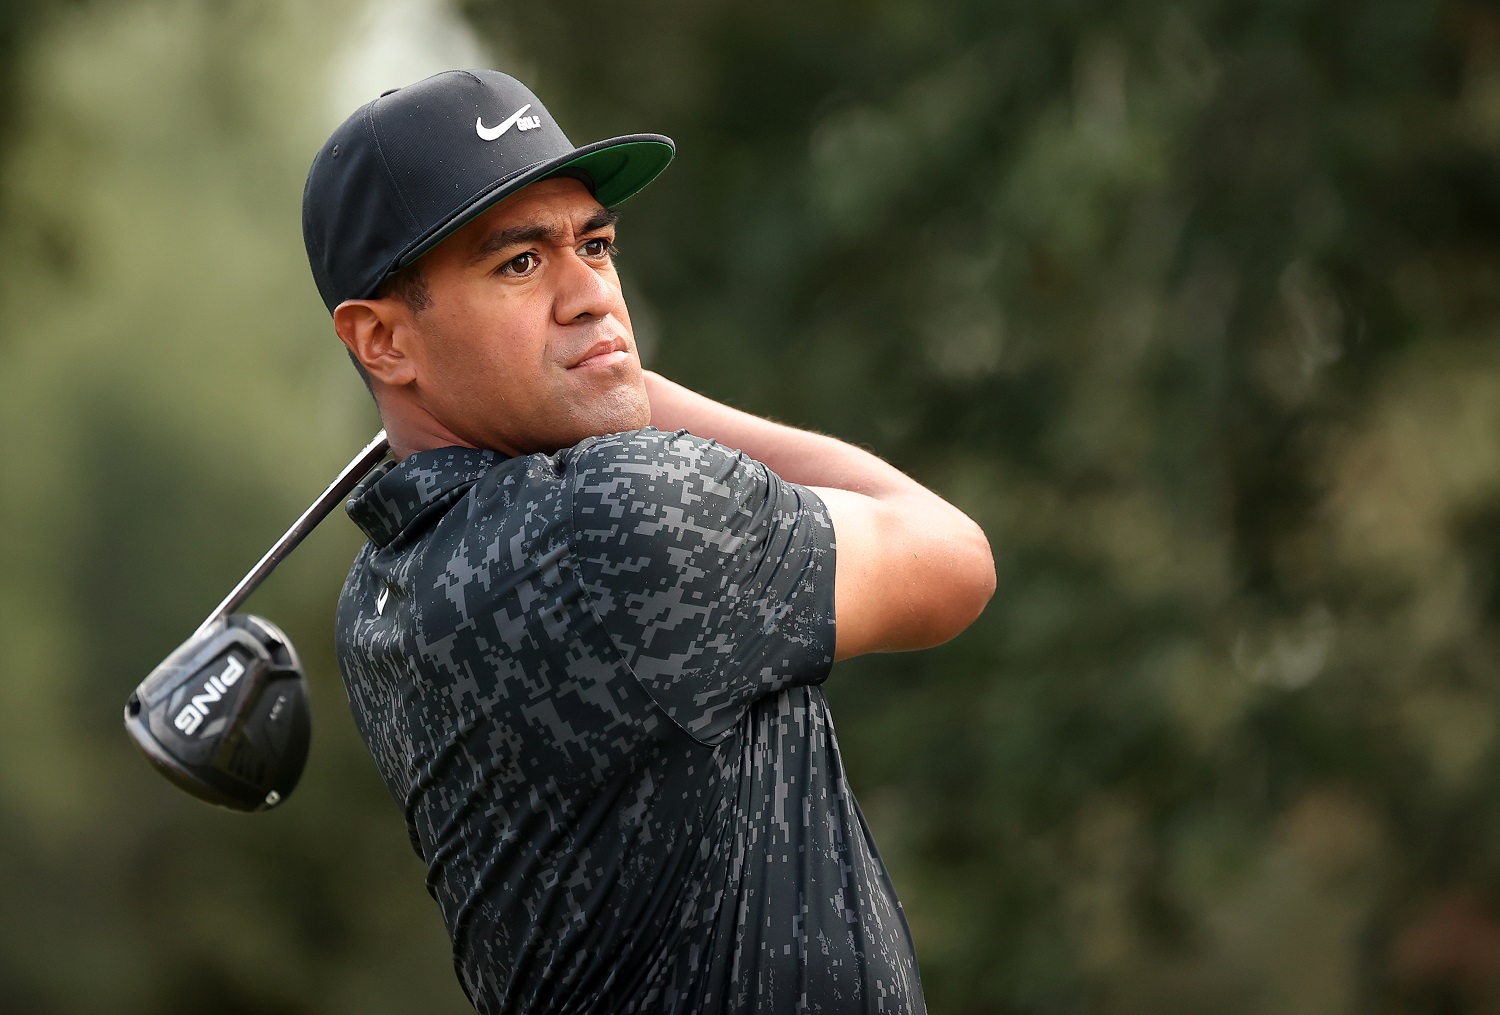 Tony Finau plays from the first tee during the first round of the Houston Open at Memorial Park Golf Course on Nov. 11, 2021, in Houston, Texas.